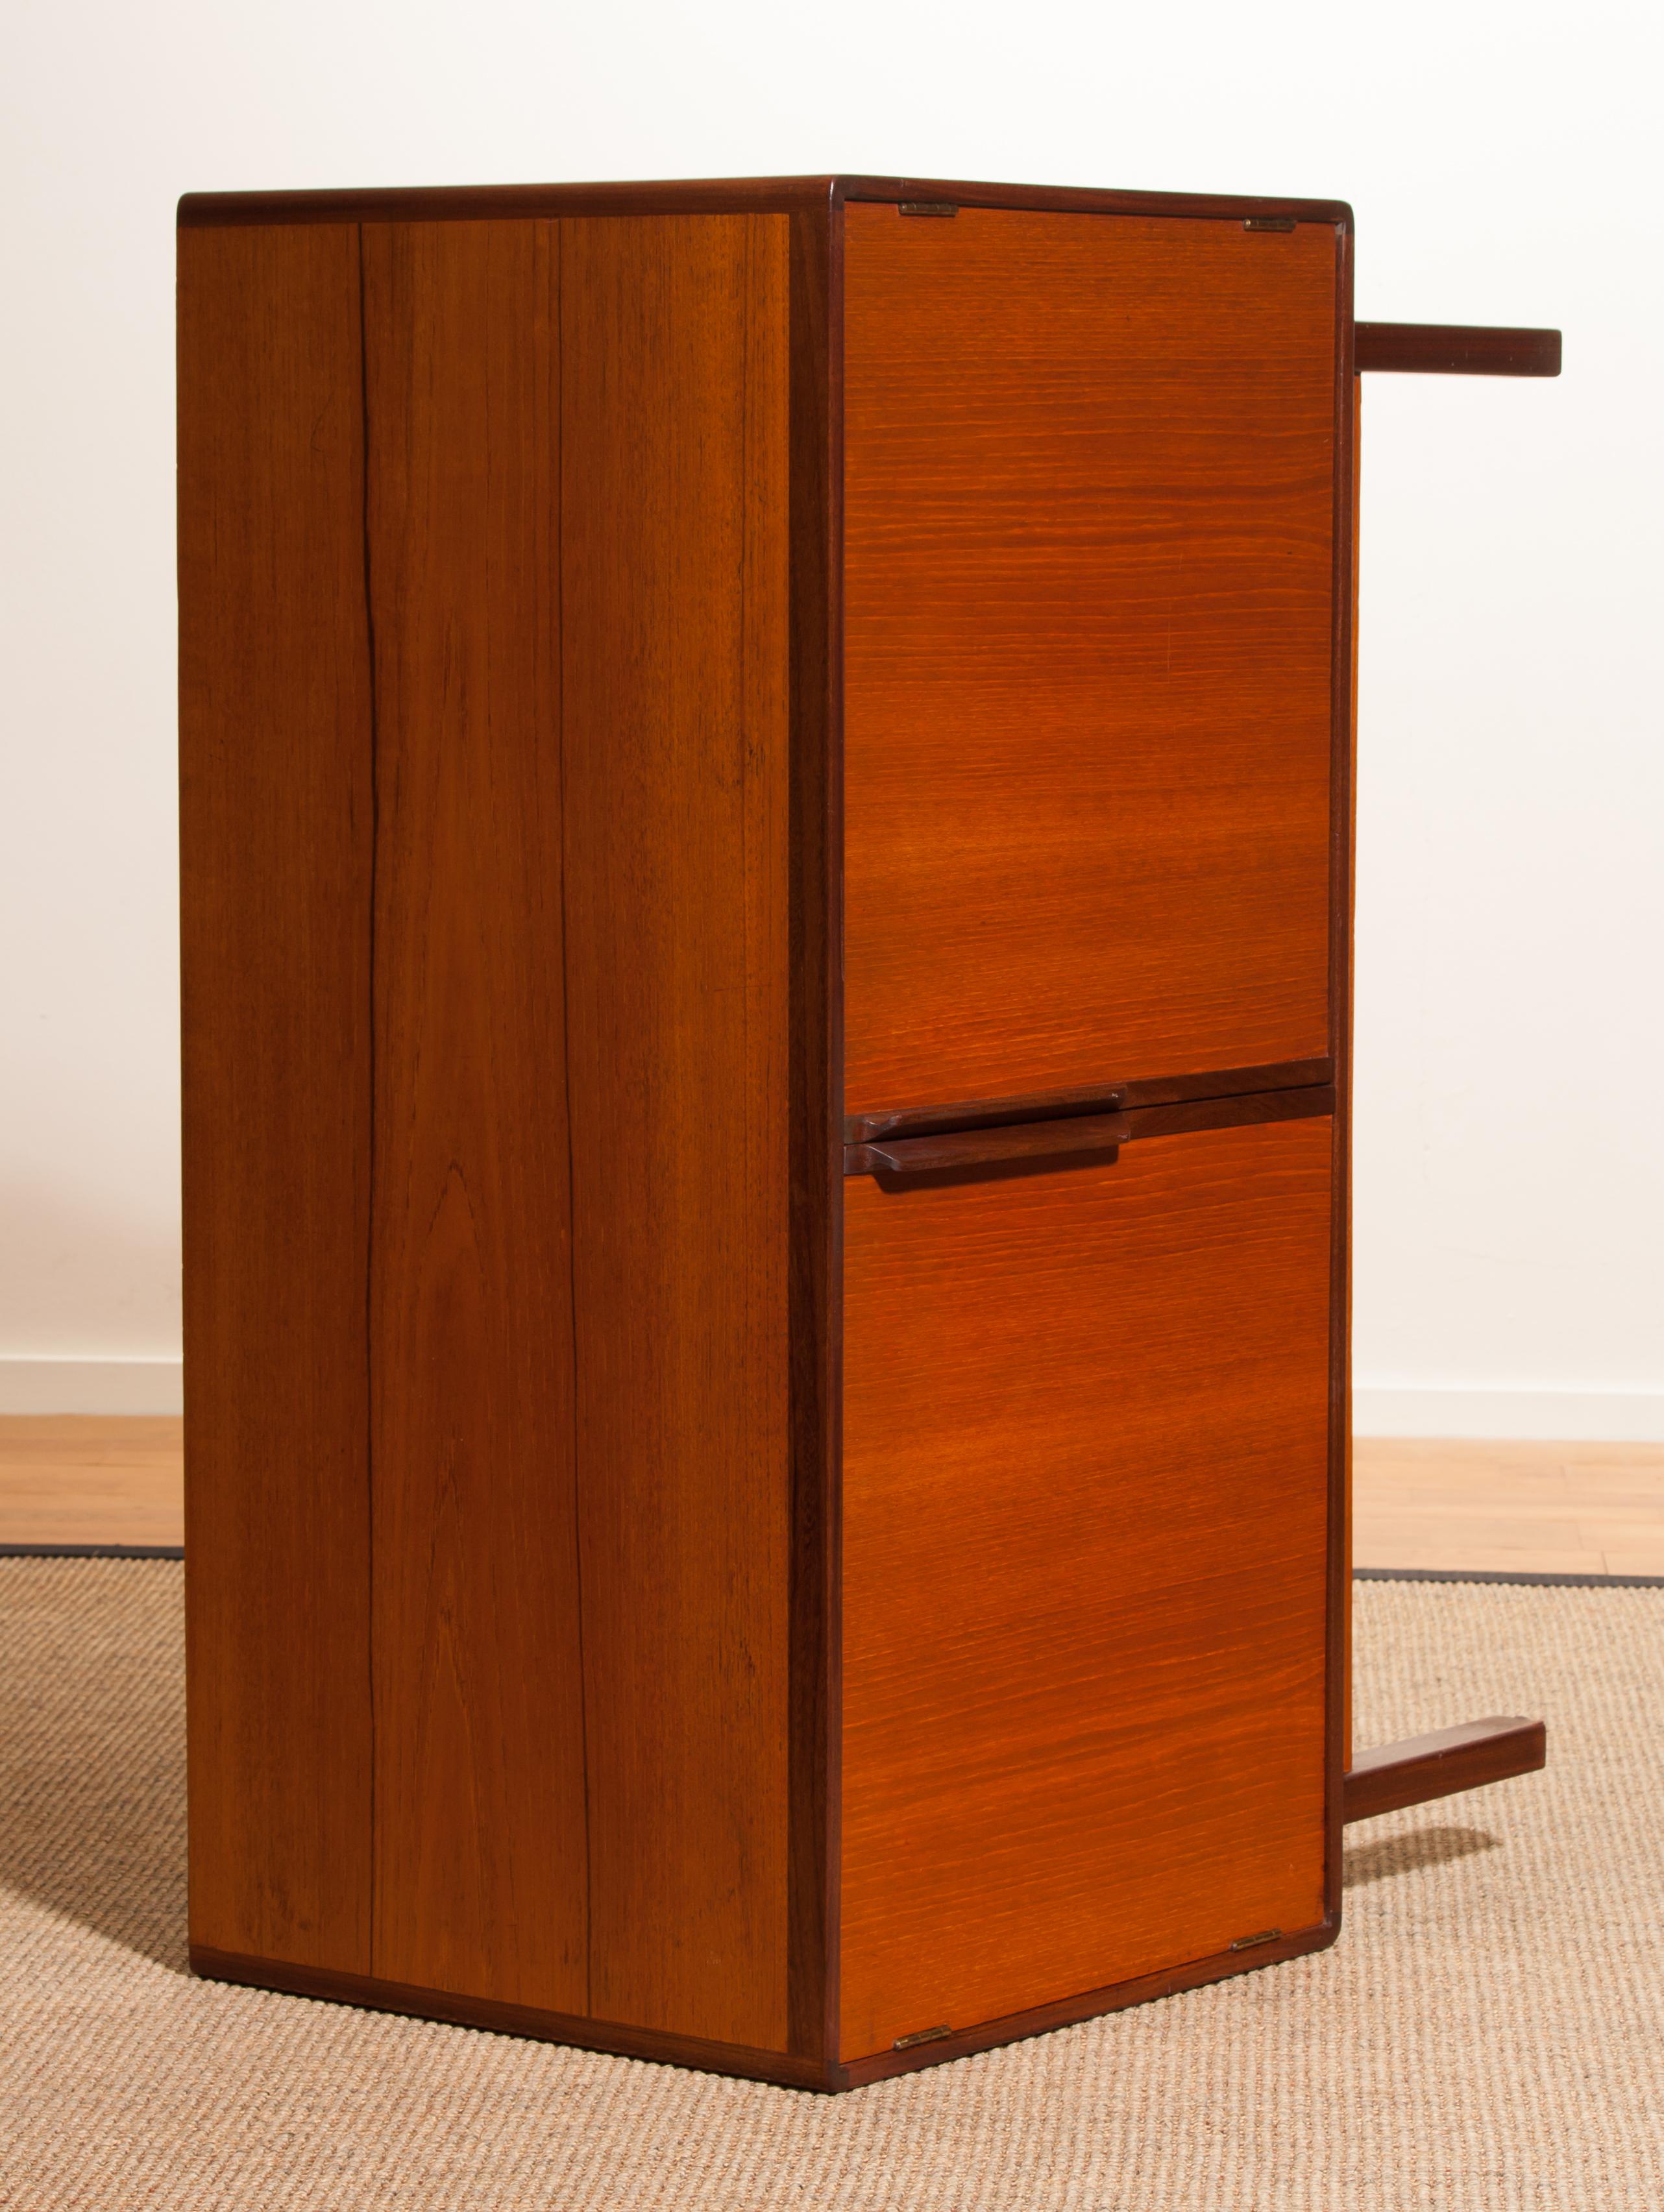 1960s, Teak and Walnut Small Sideboard Cabinet by Asko Finland 3